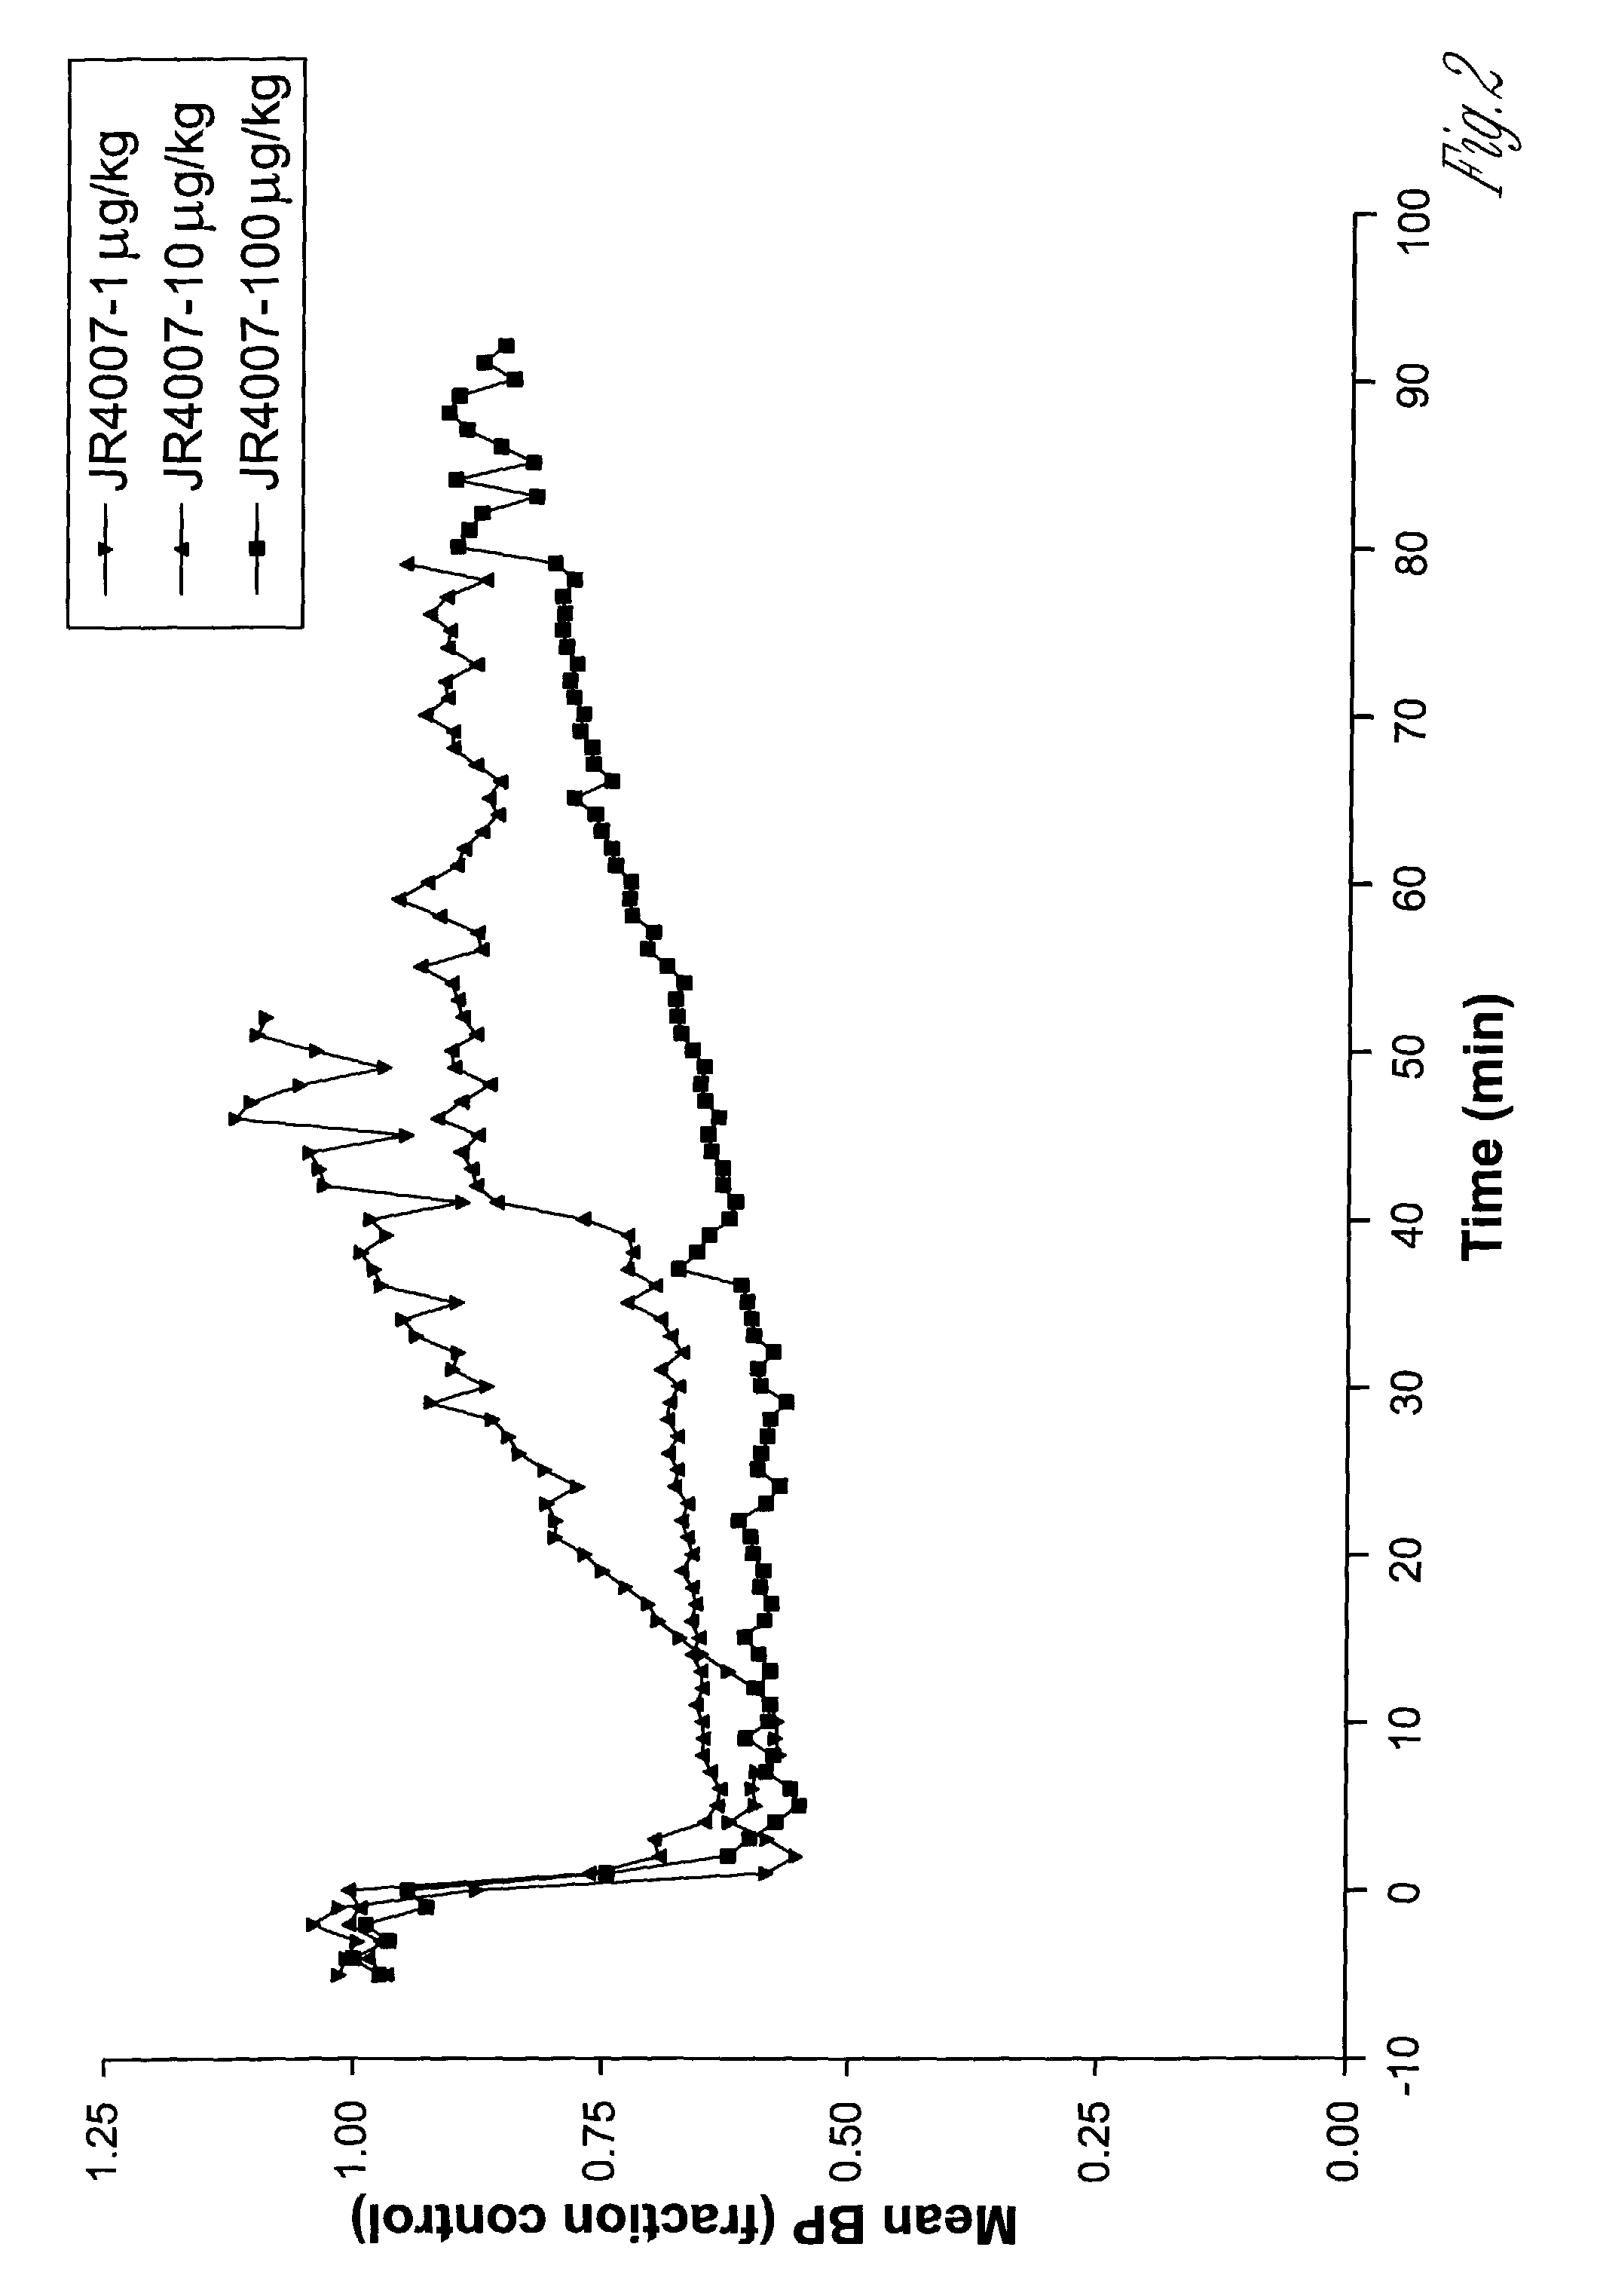 2-propynyl adenosine analogs having A2A agonist activity and compositions thereof